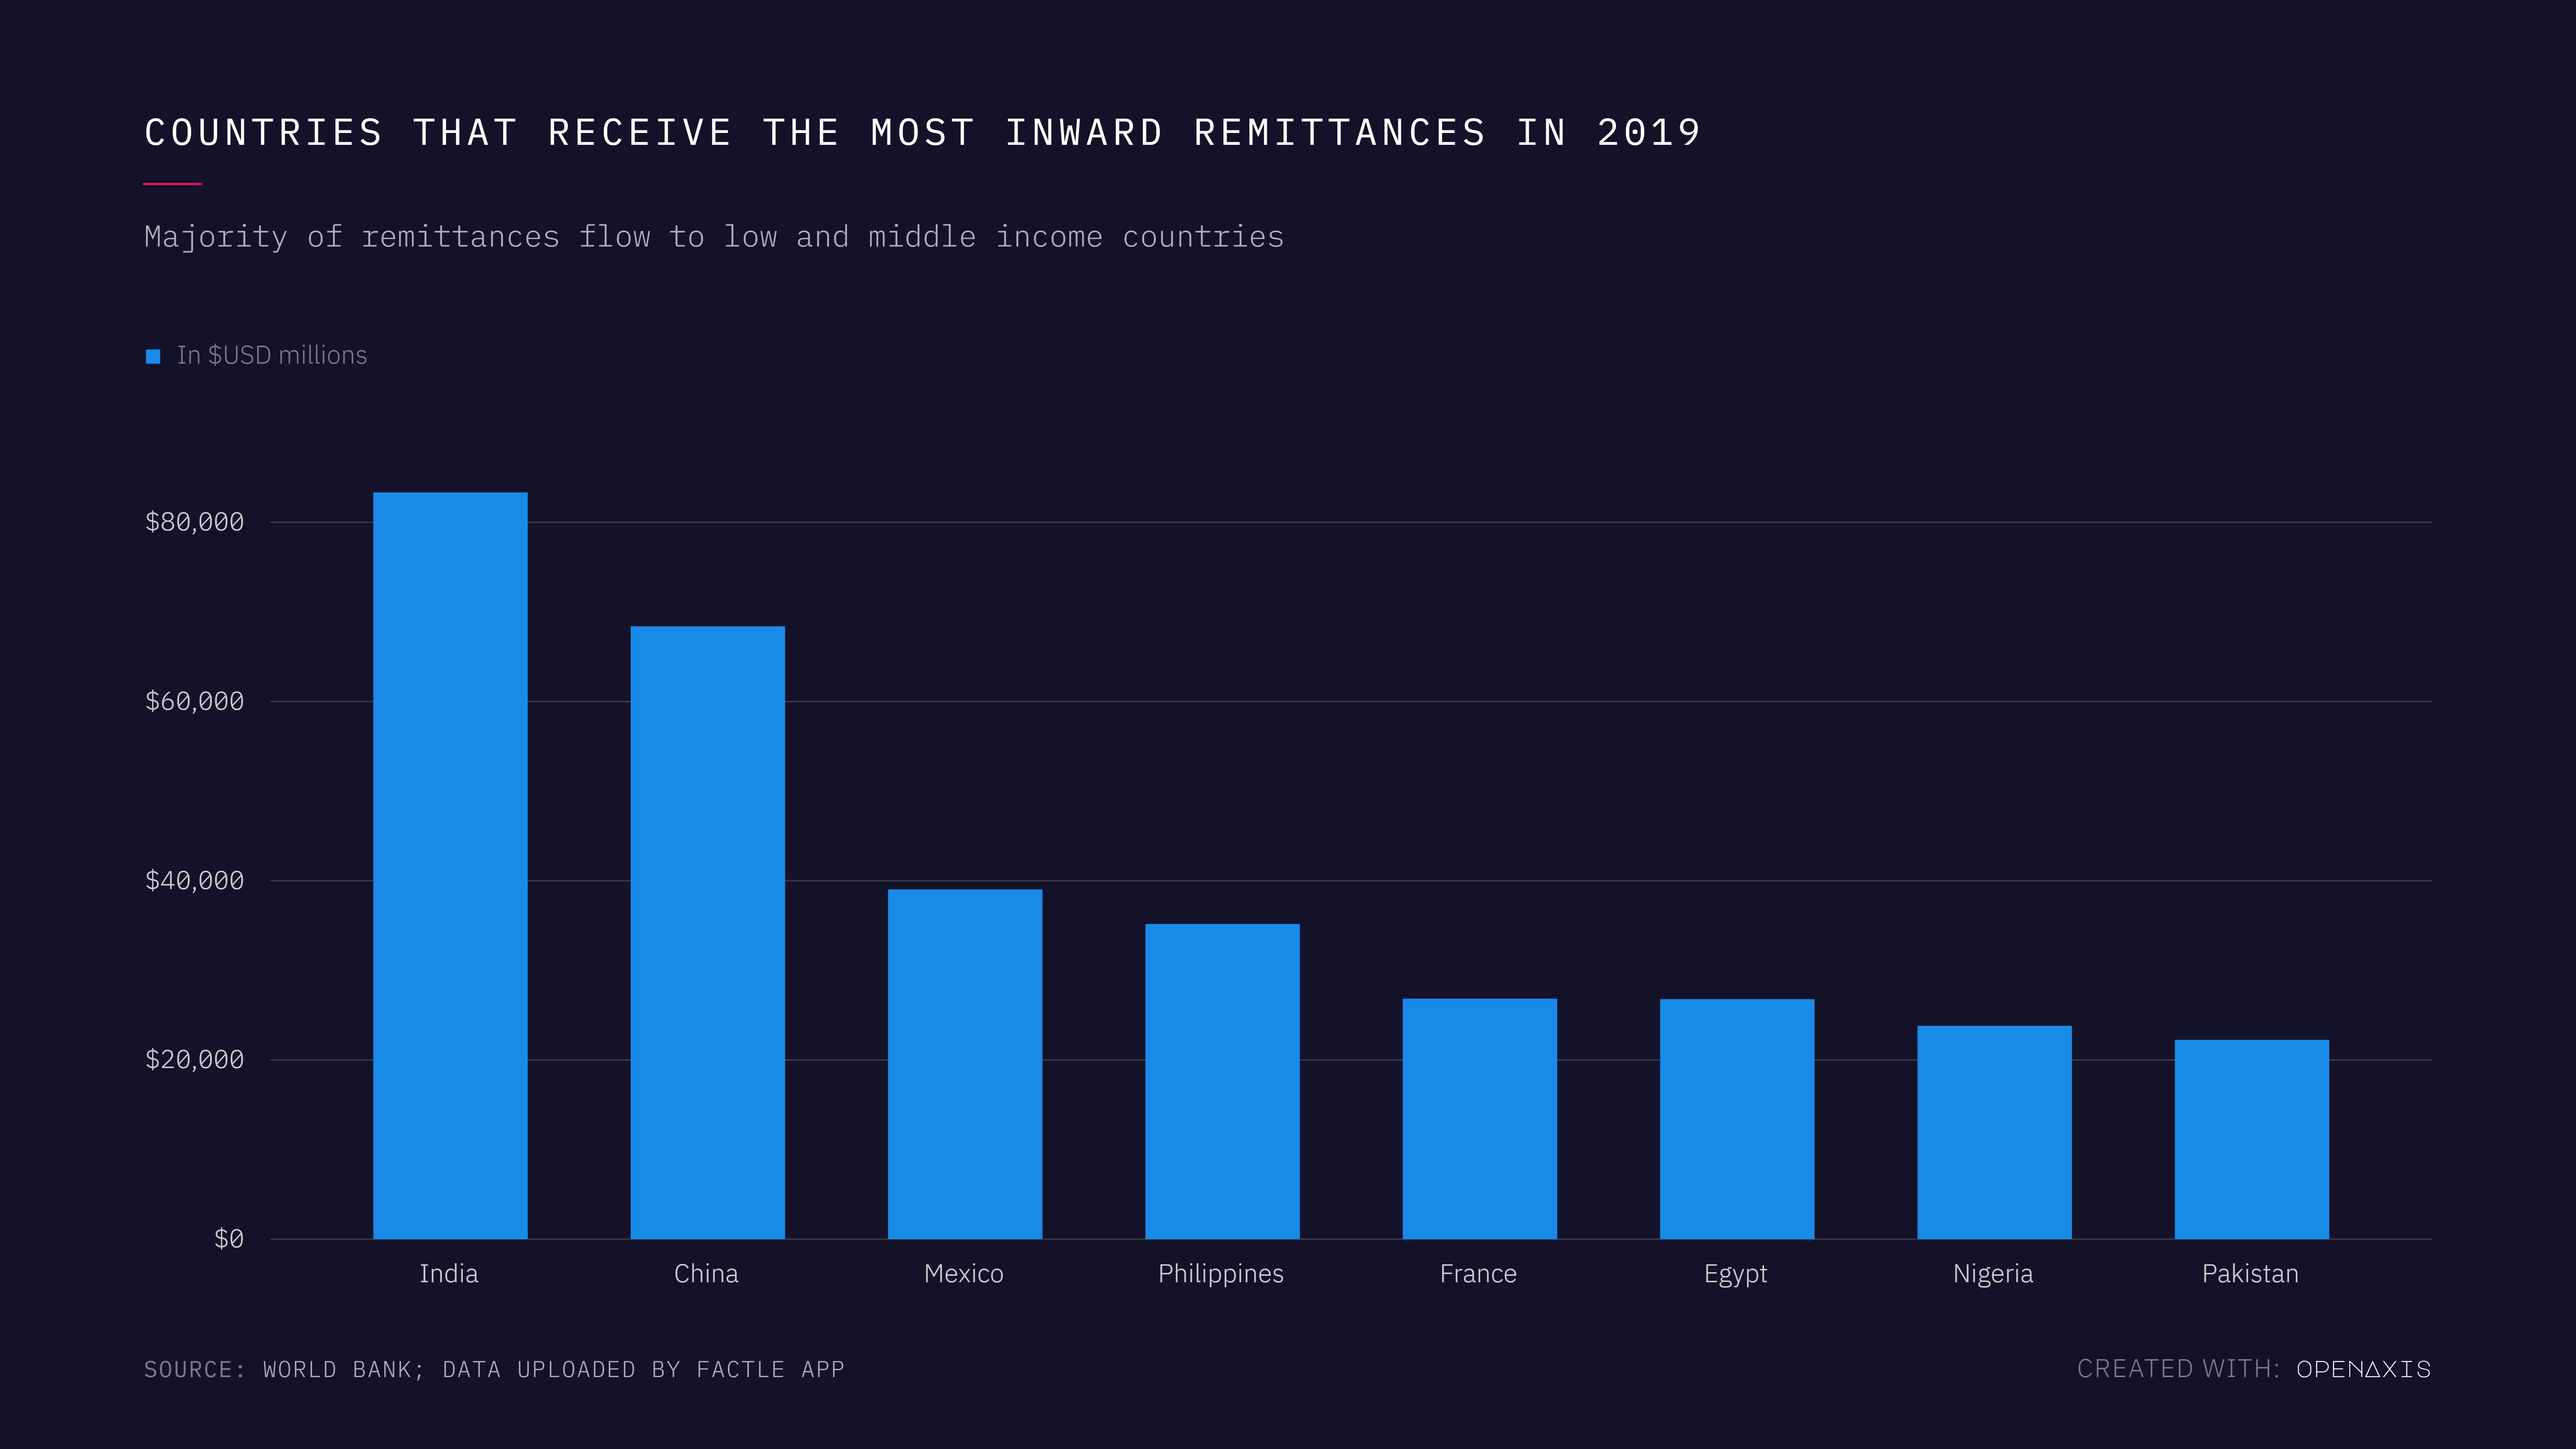 Countries that receive the most inward remittances in 2019